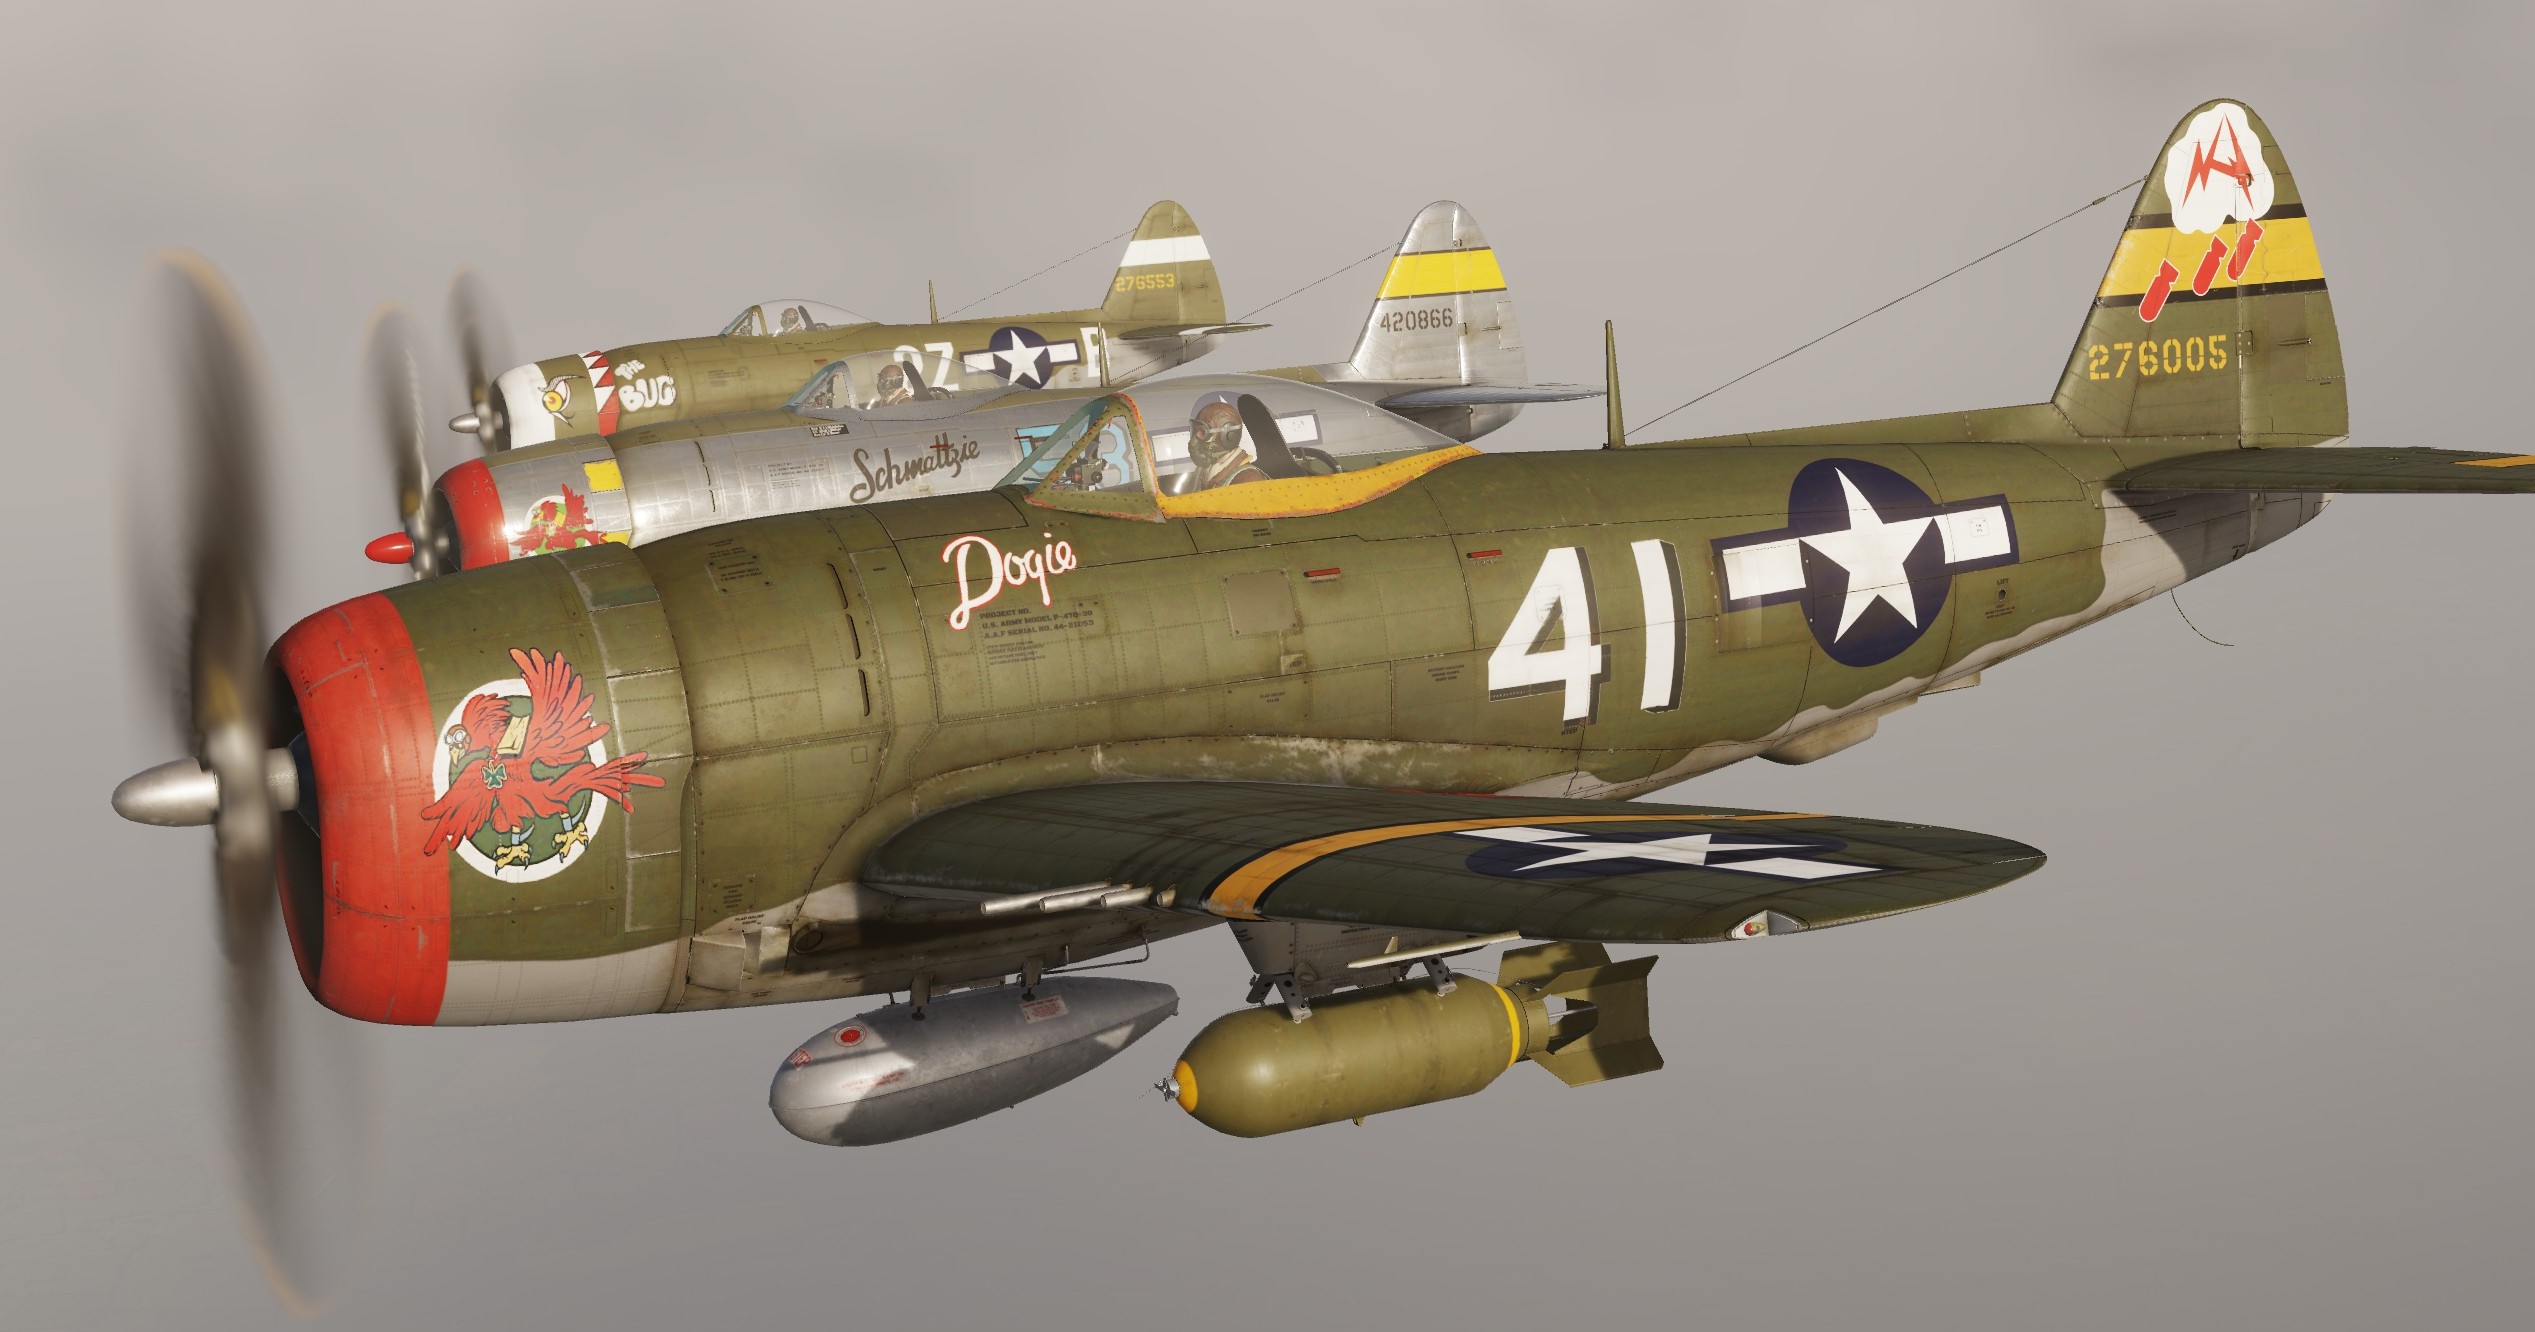 P47-D 30 "Doggie" of the 65th FighterSquadron and 57th Fighter Group Lua Modified!